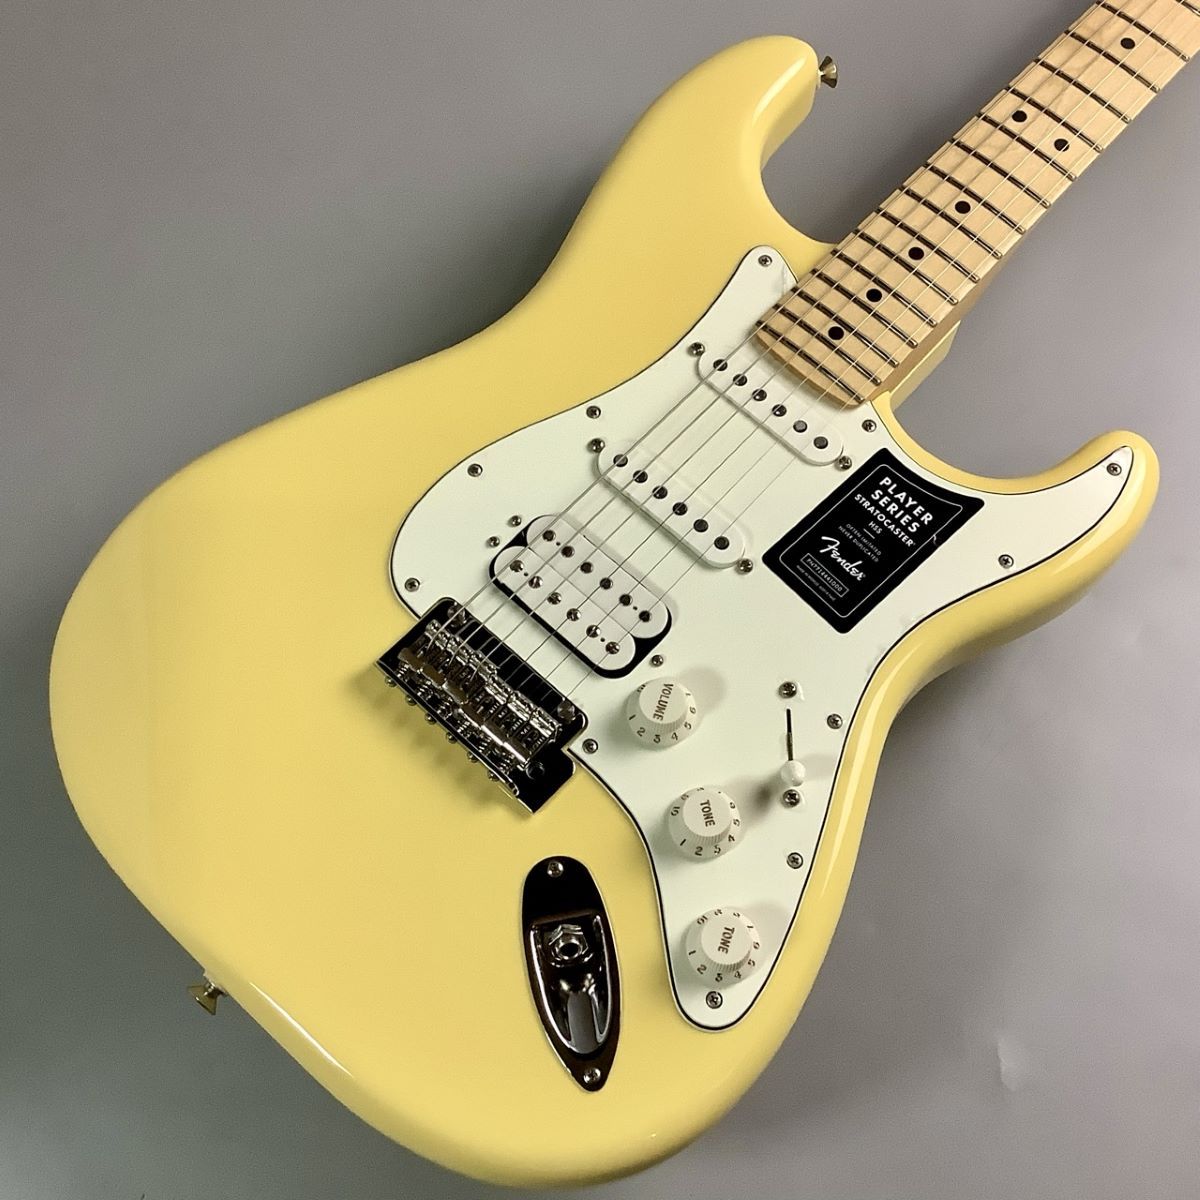 Fender Player Series Stratocaster ピックアップ - エレキギター